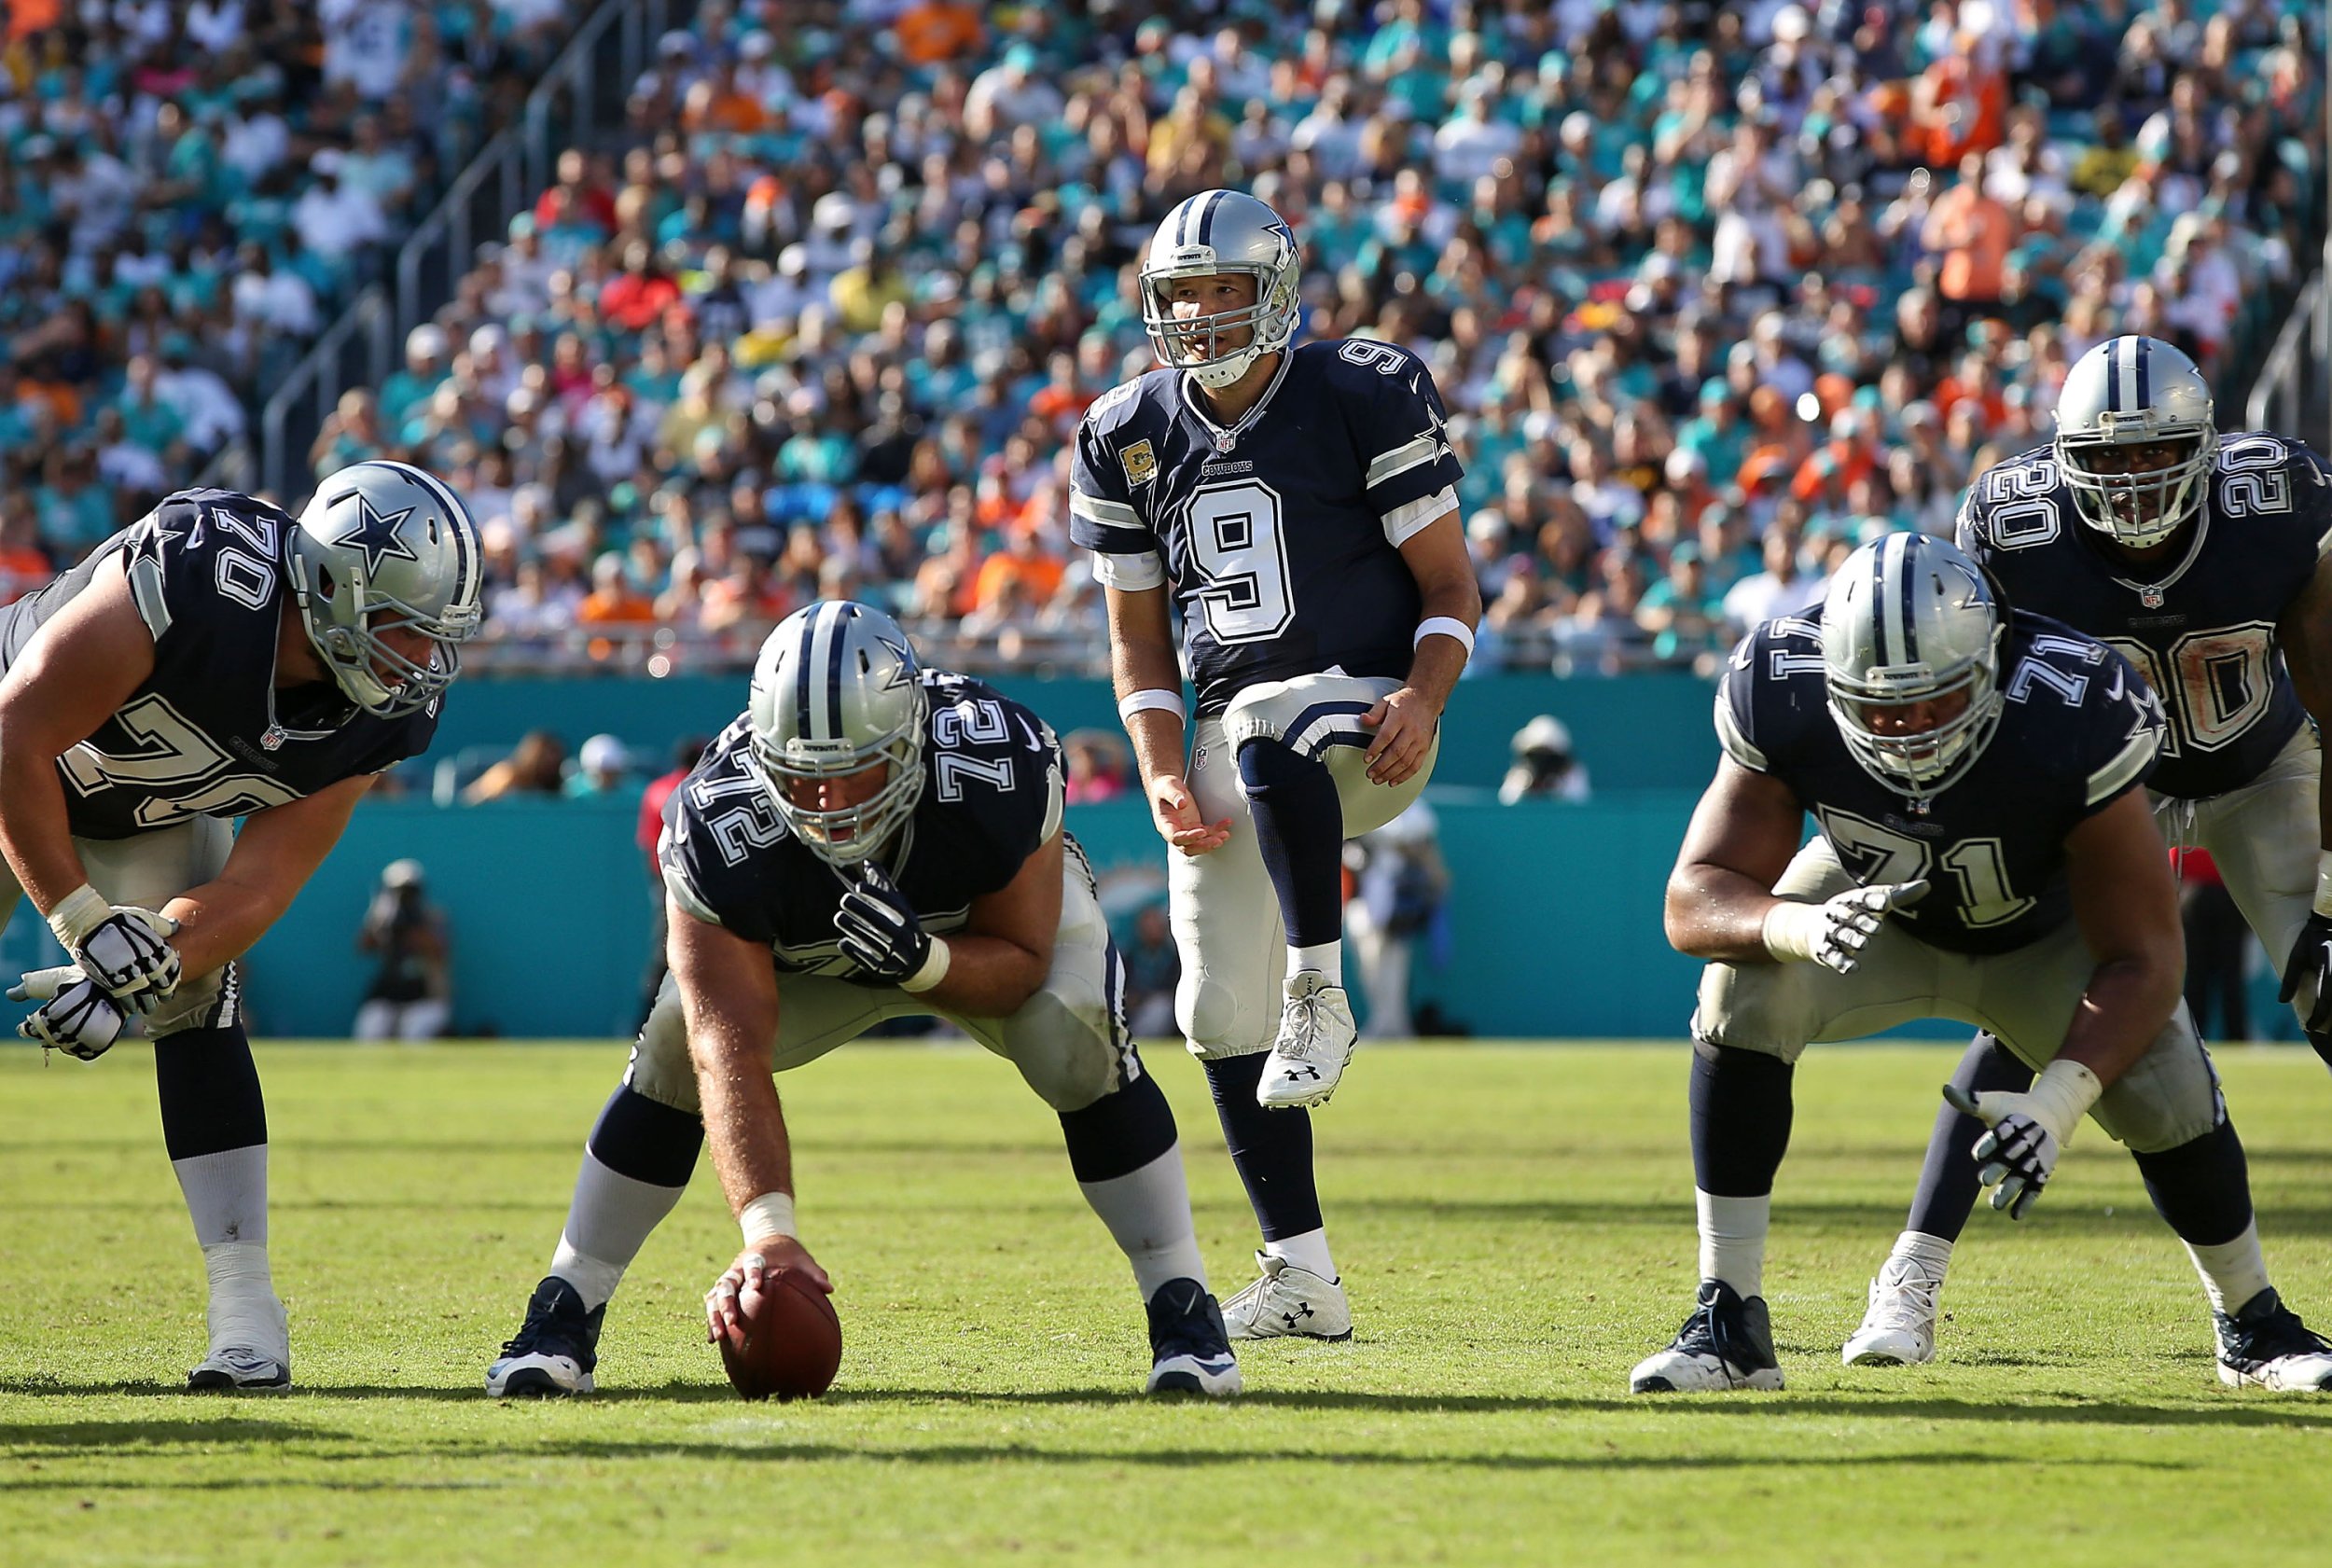 Dallas Cowboys Schedule 2016 Dates, Start Times, Games On National TV